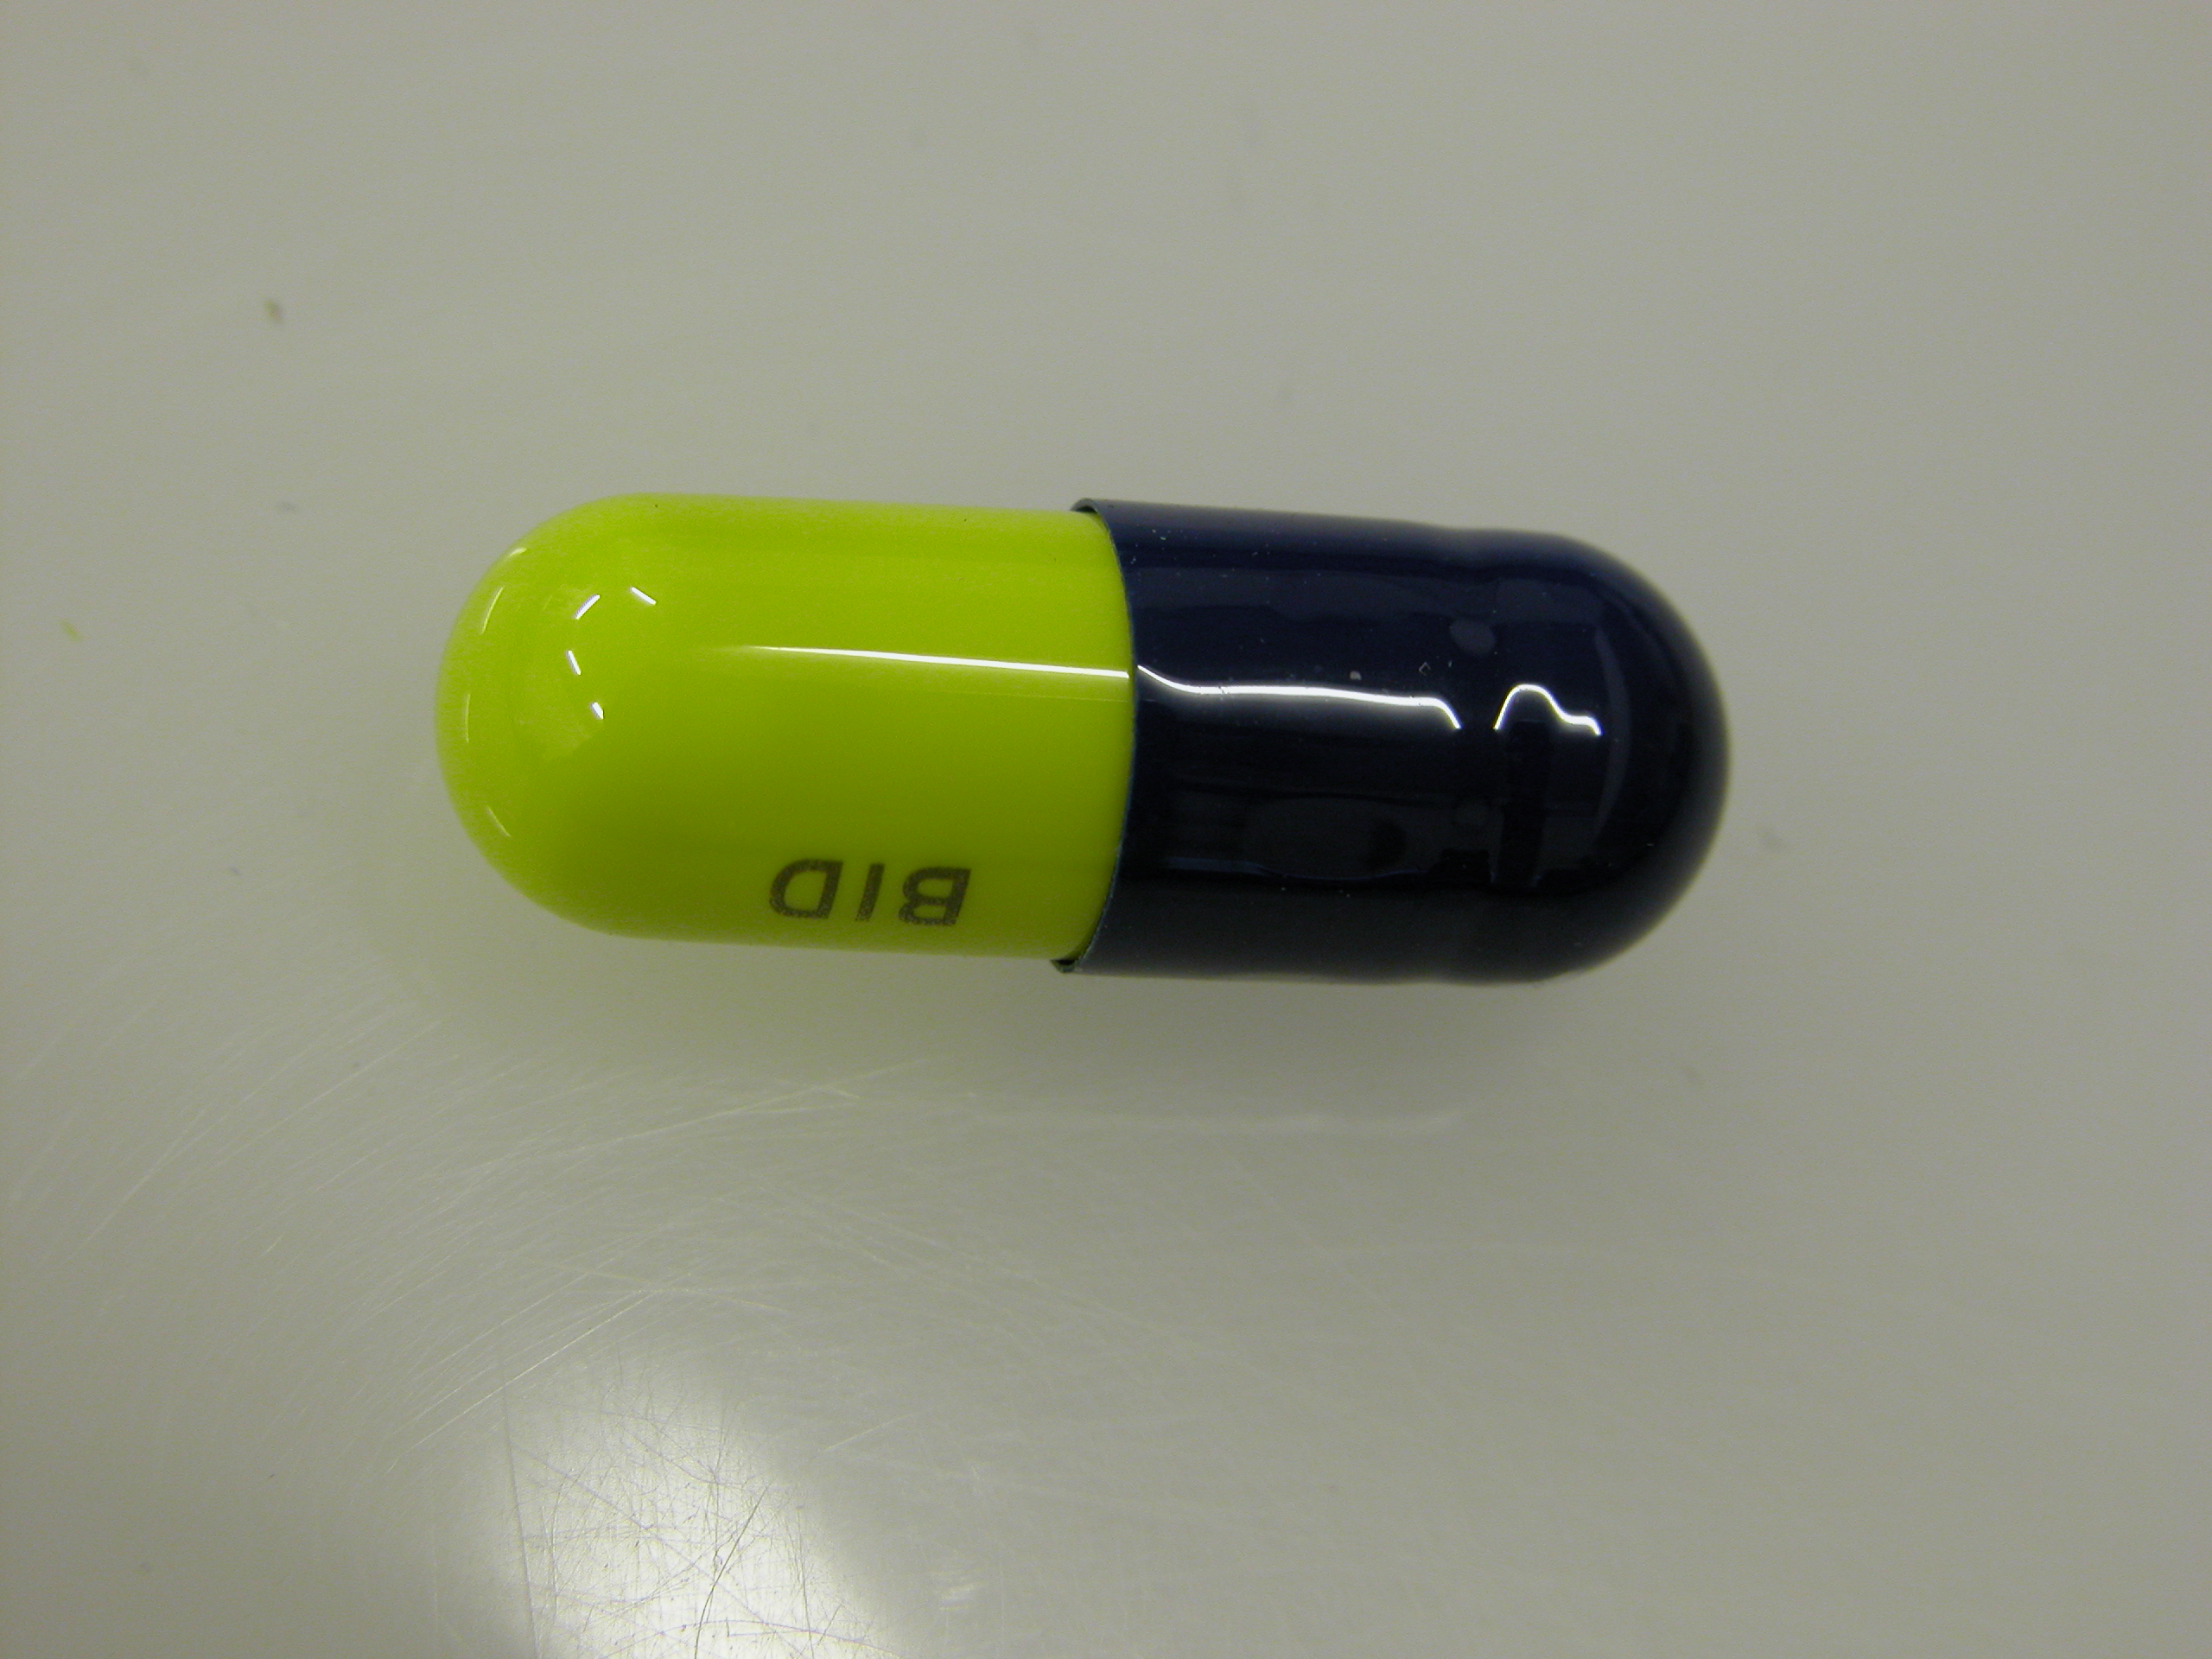 Image*After images pill medicine yellow blue capsule